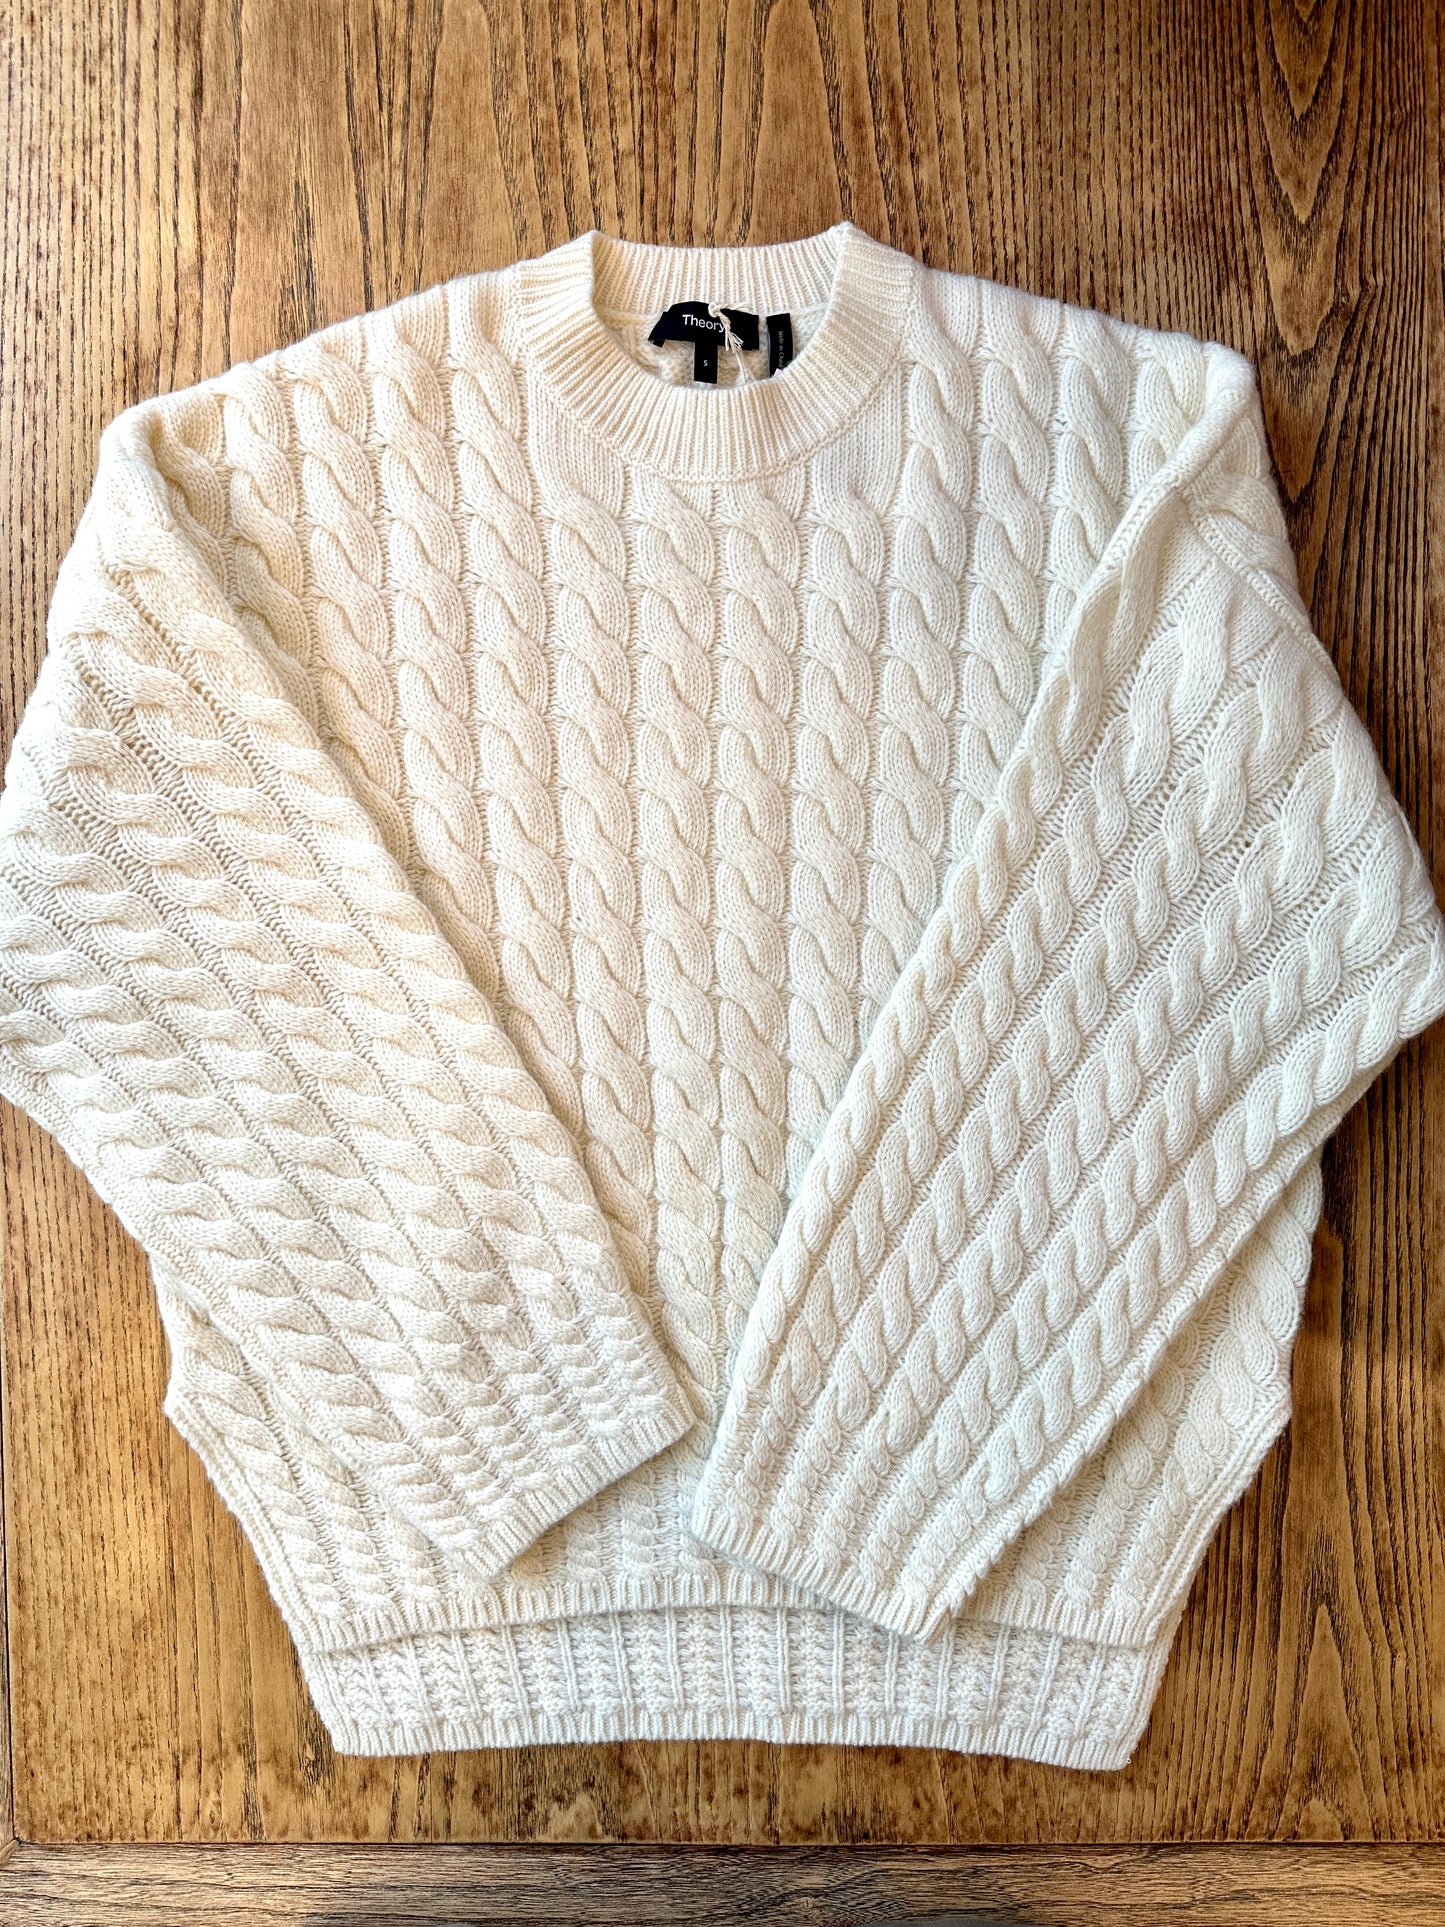 THEORY textured wool sweater/ S